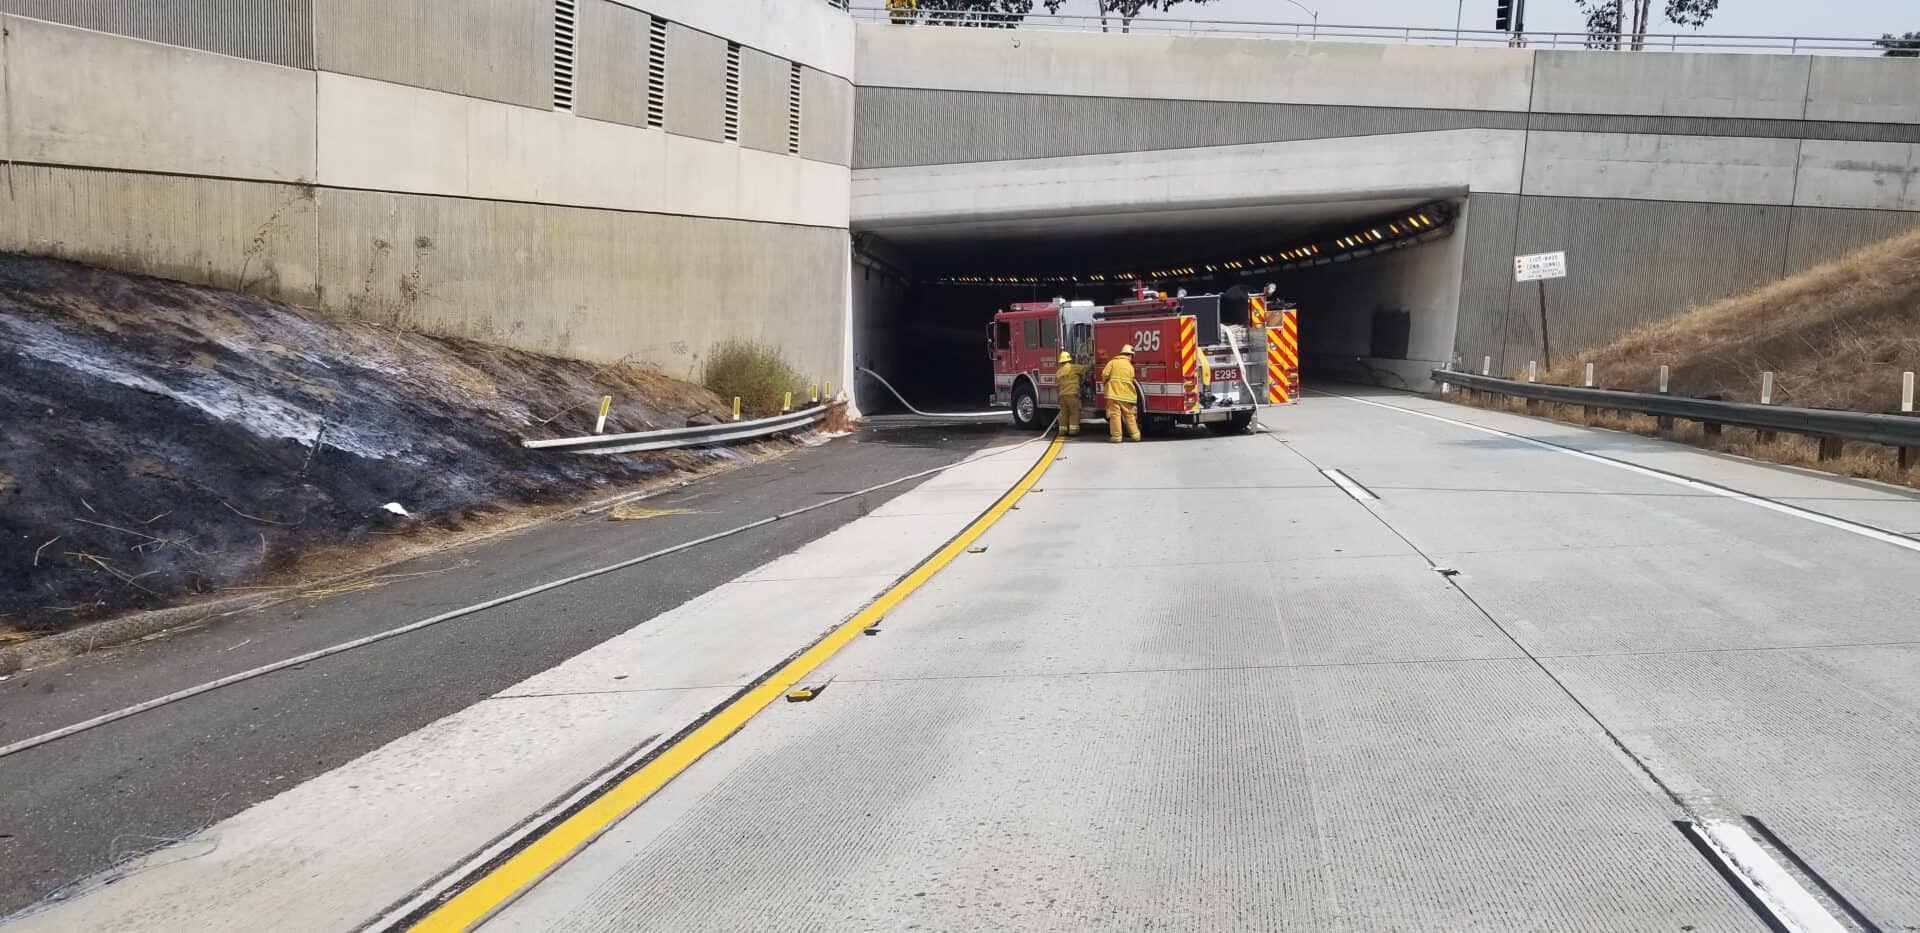 Fire Life Safety Renovation of the Century Freeway Tunnels